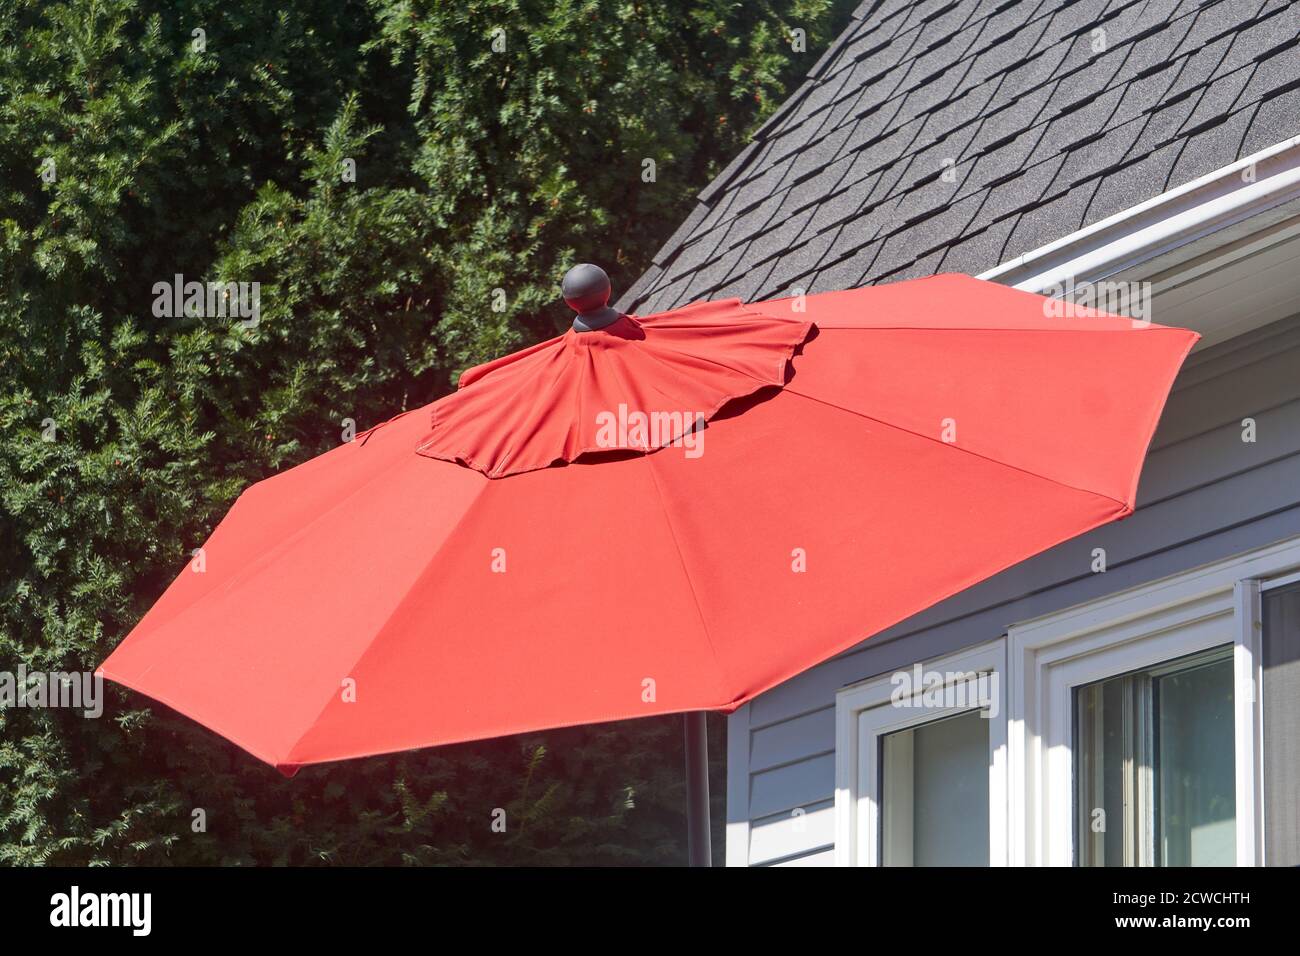 Big red outdoor umbrella outside a house Stock Photo